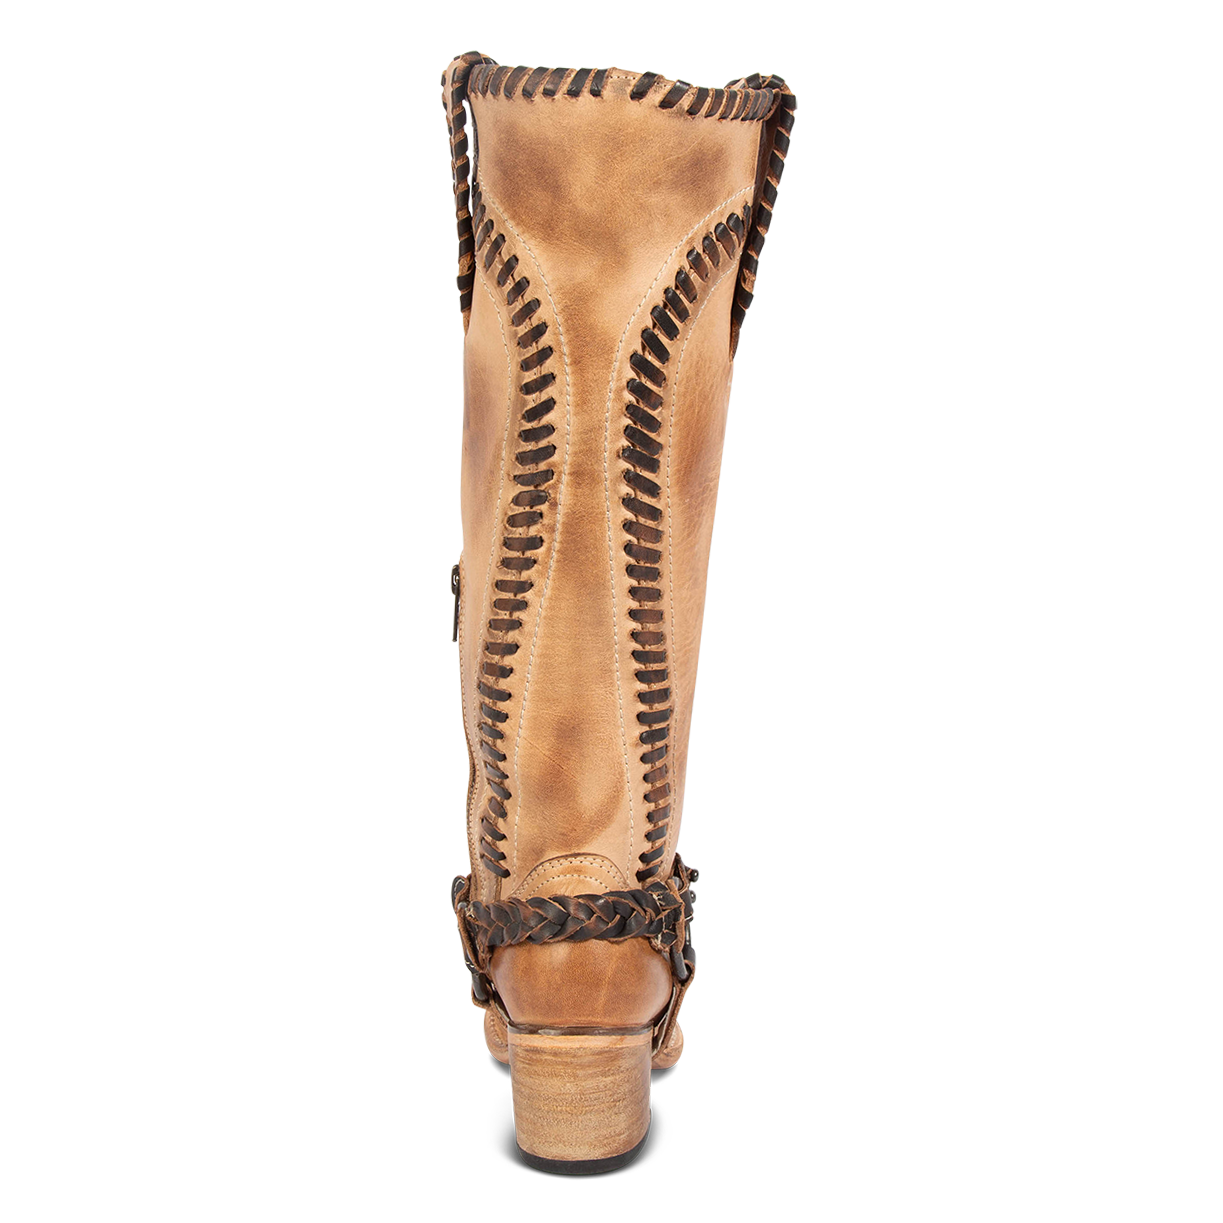 Back view showing whip stitch detailing, braided ankle harness and stacked heel on FREEBIRD women's Clover beige leather boot